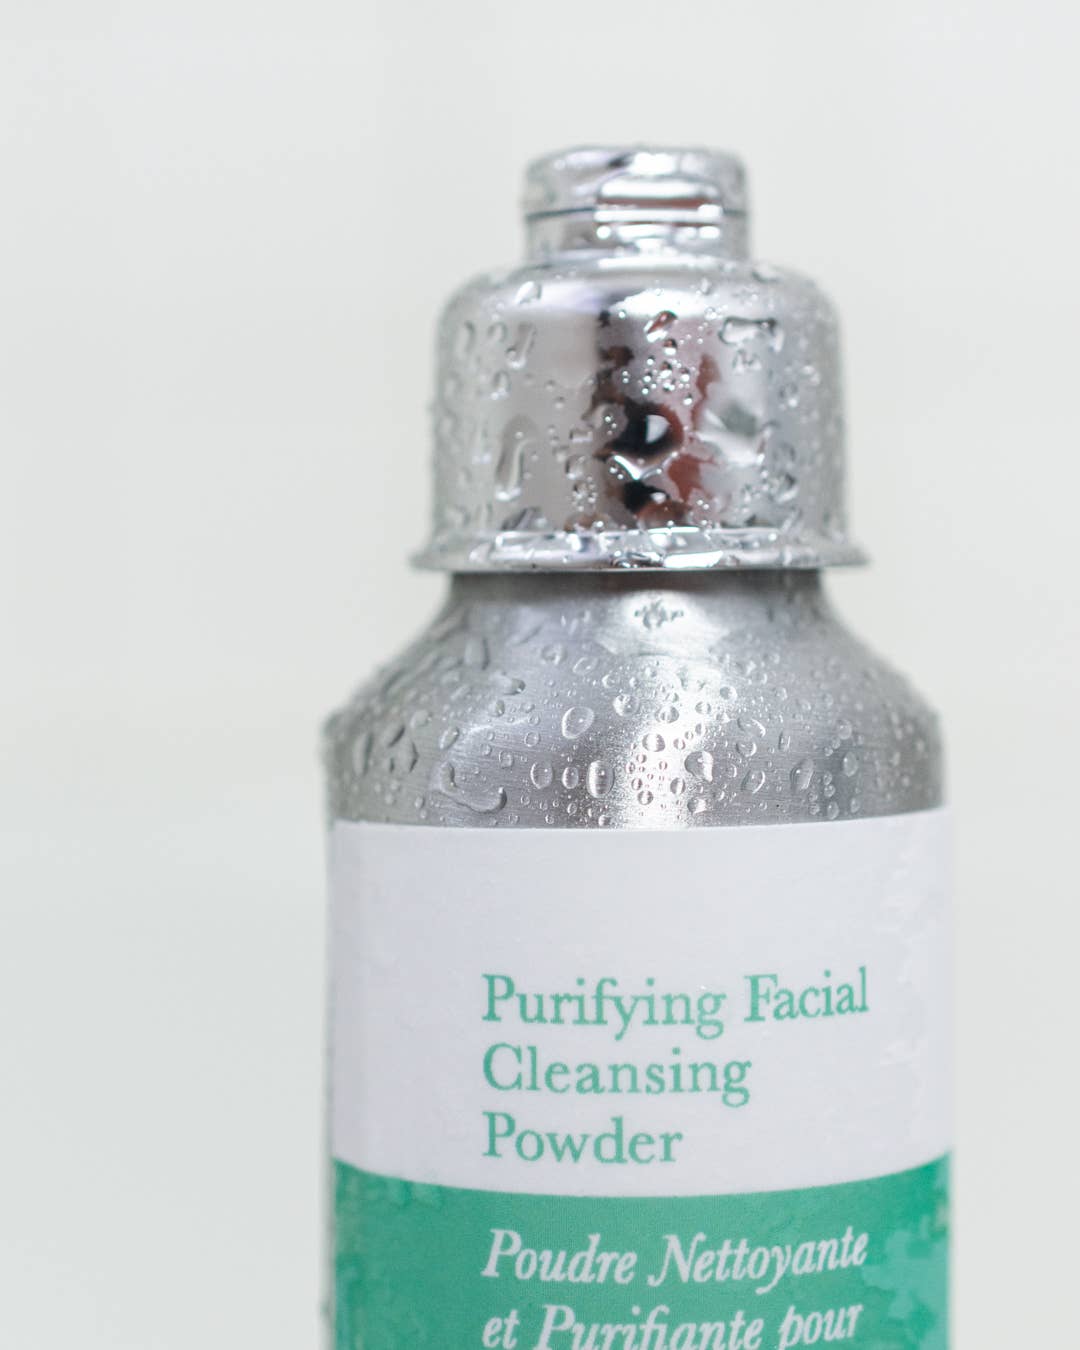 Seed Phytonutrients - Seed Purifying Facial Cleansing Powder